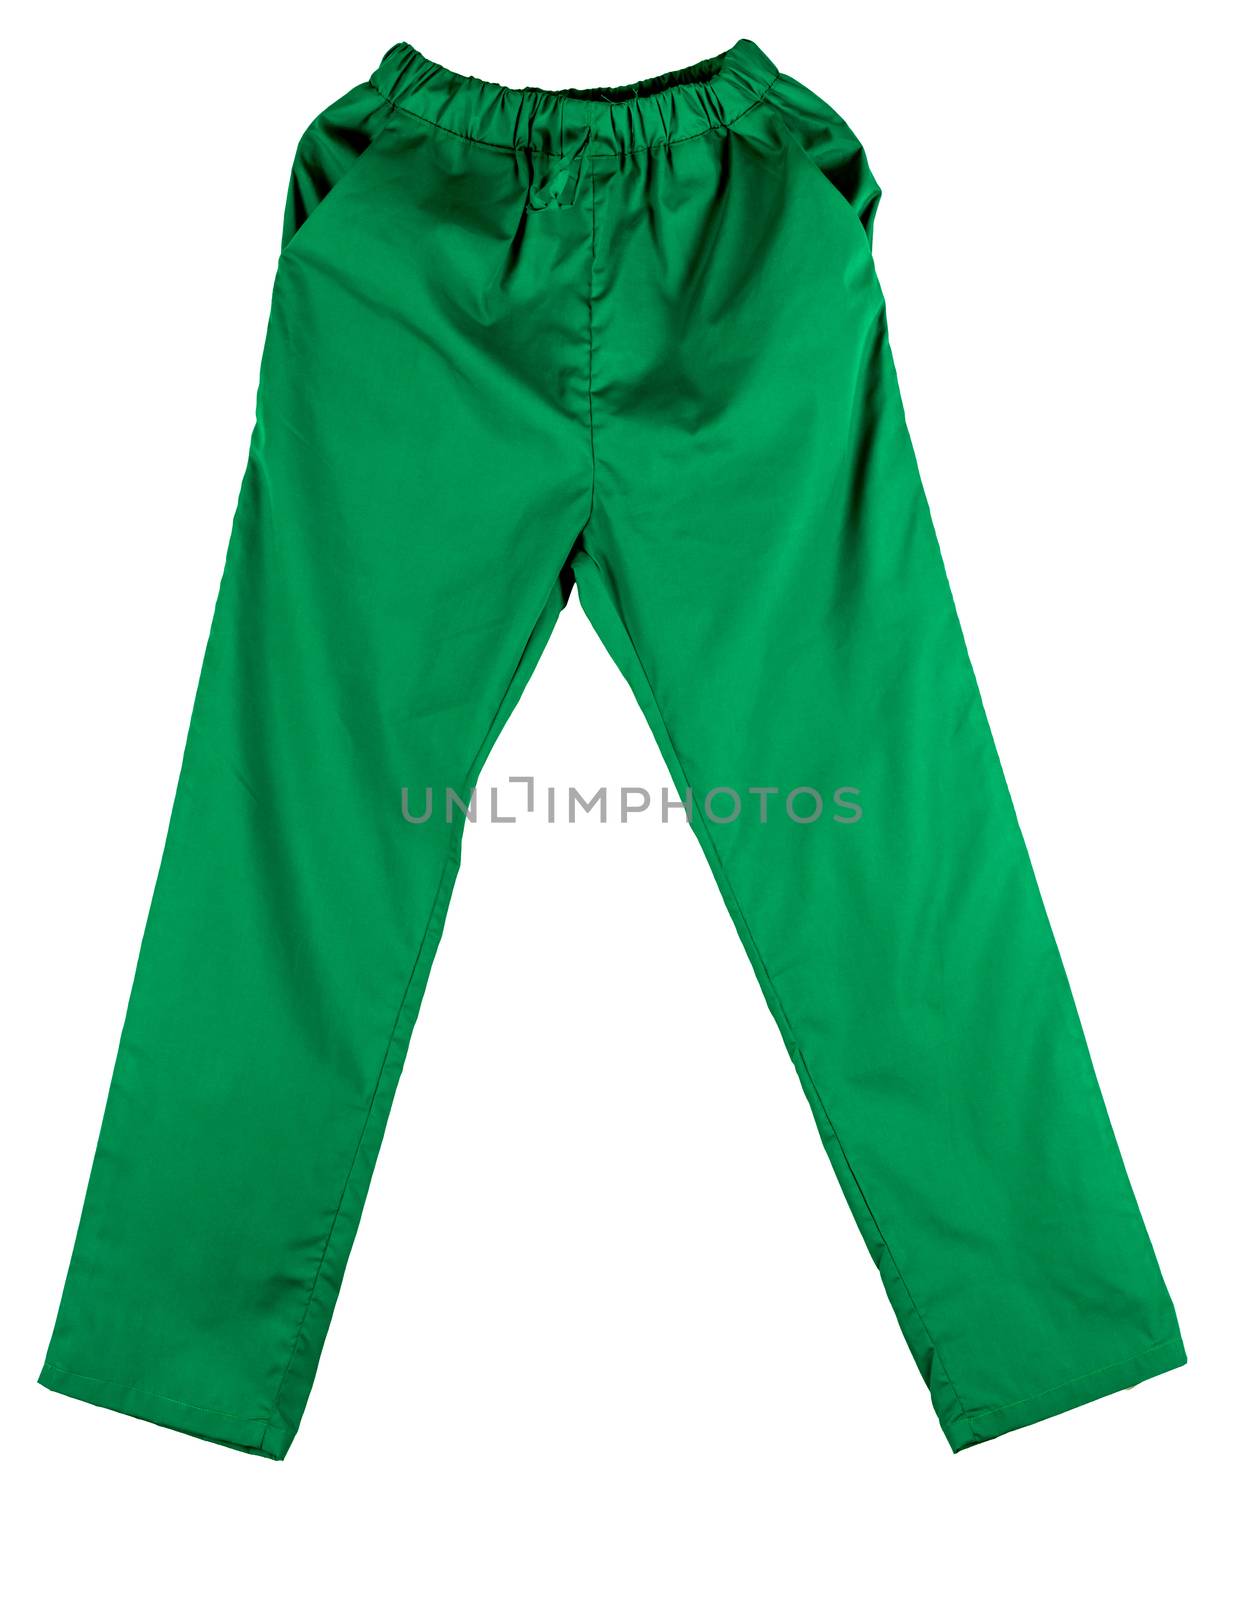 Green scrubs uniform isolated on white background with copy space. Green pants for veterinarian, doctor or nurse by Fahroni